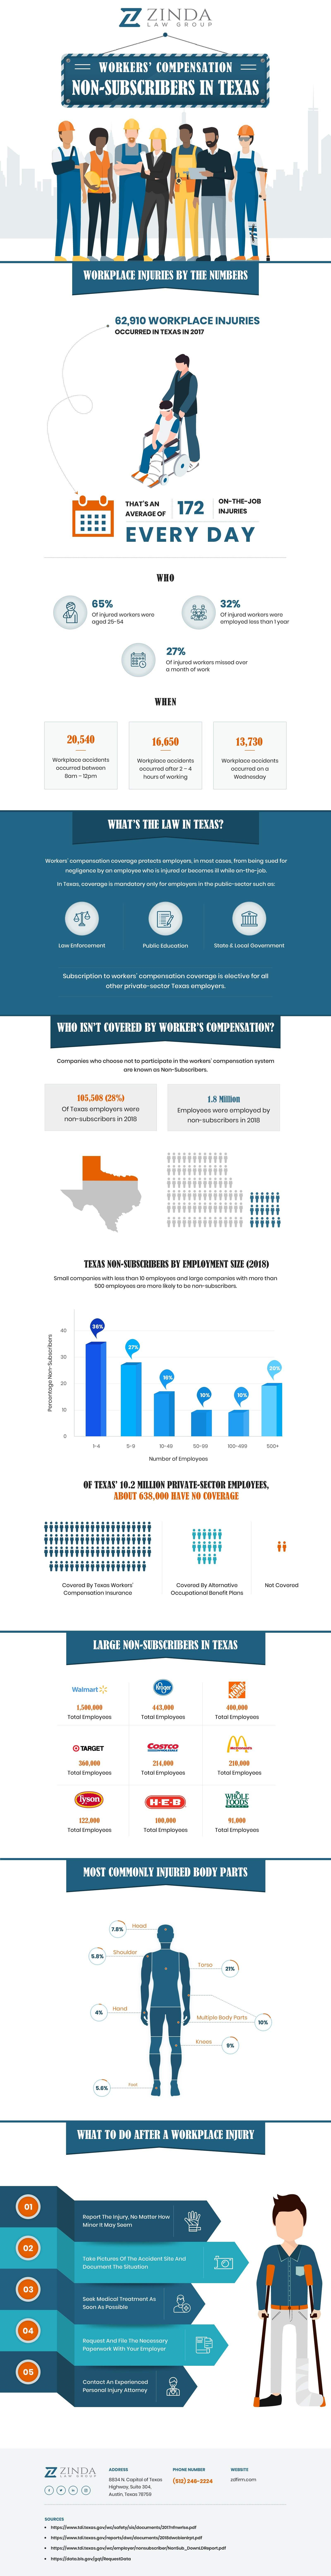 Workers' Compensation Non-Subscribers in Texas' Compensation Non-Subscribers in Texas Infographic